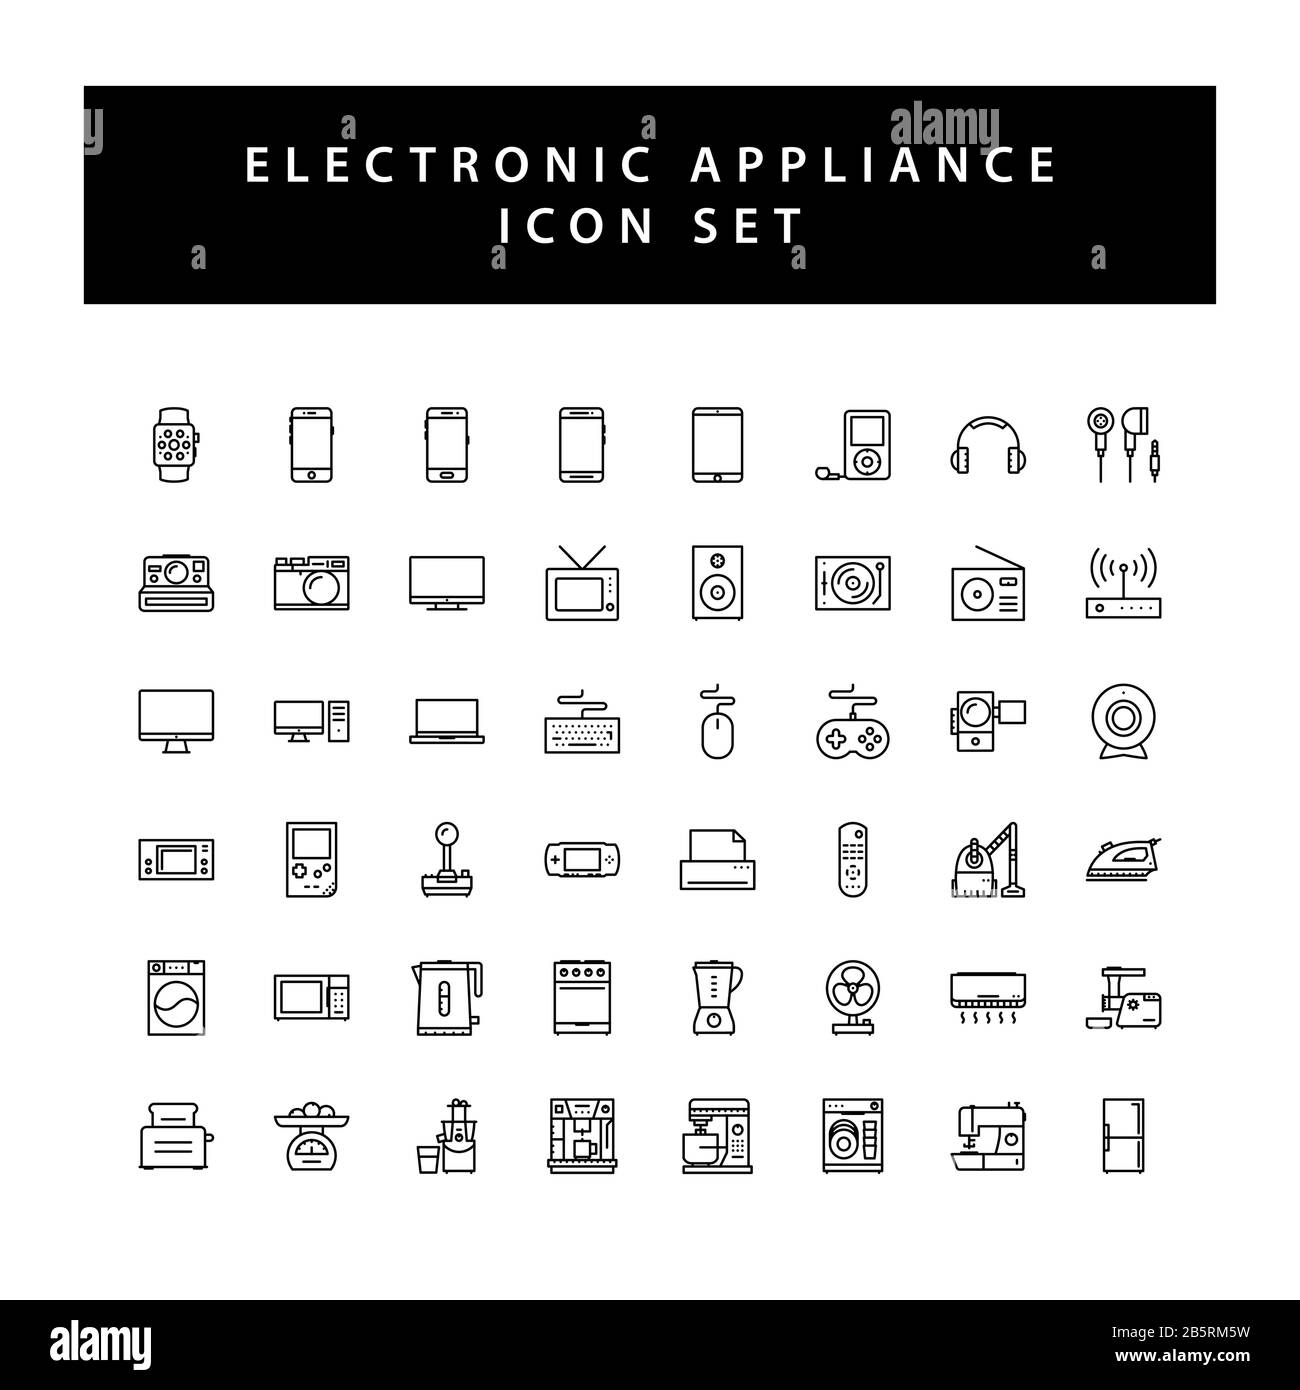 Home appliances electronic icon set with black color outline style design. Stock Vector